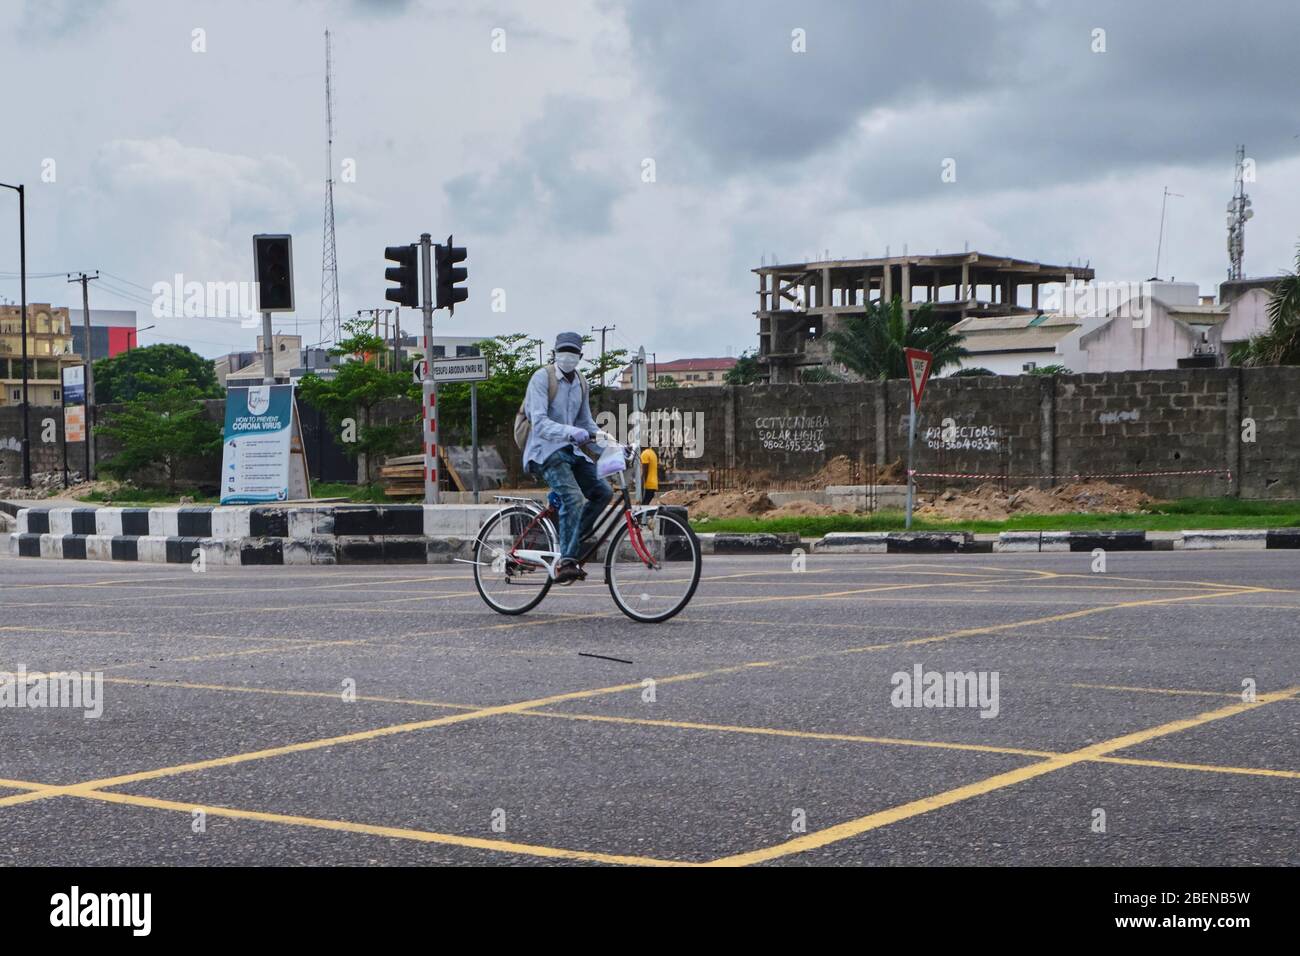 A man rides a bike across the road during the Covid-19 lockdown in Lagos, Nigeria. Stock Photo